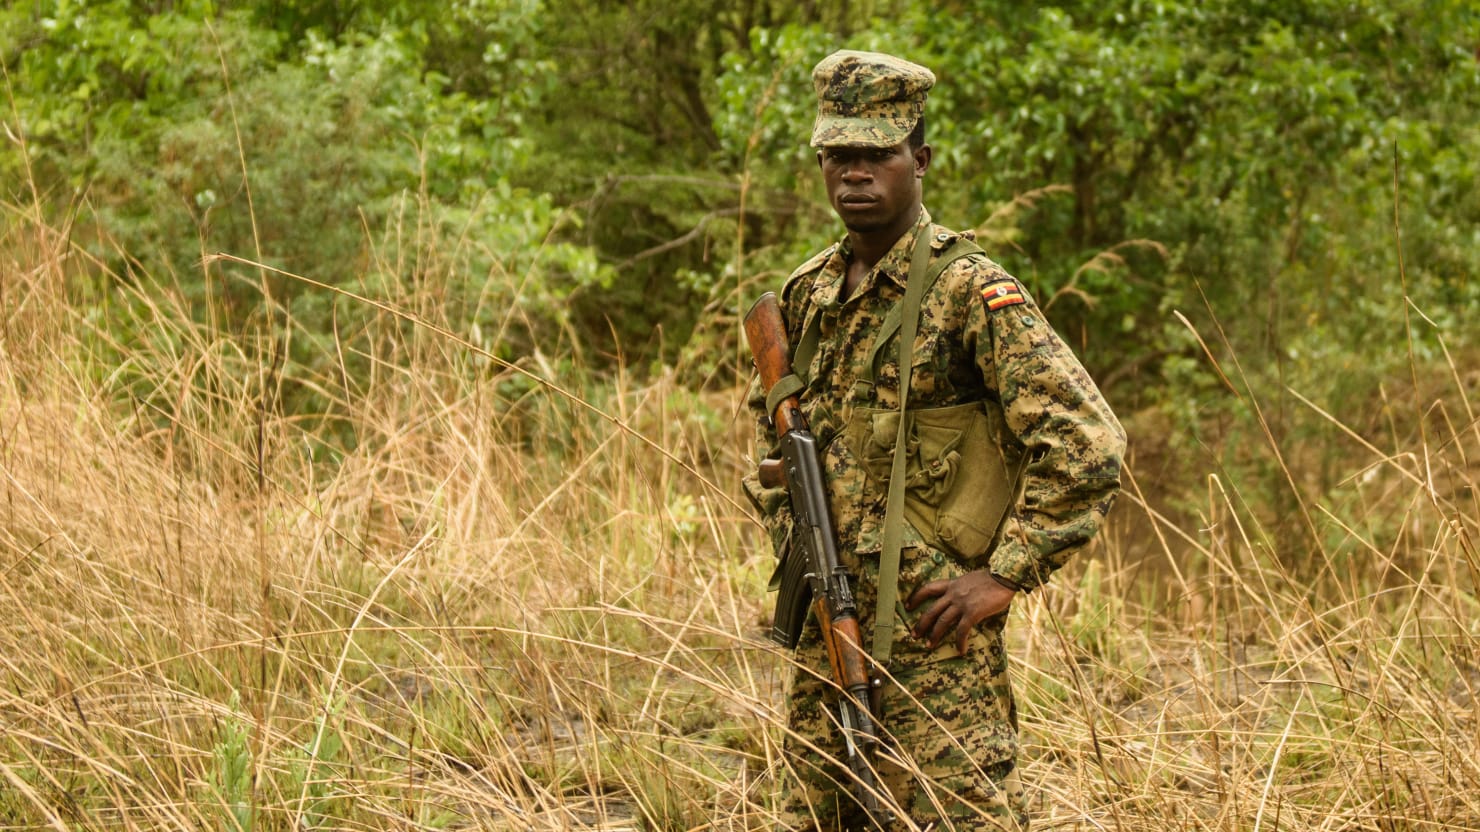 Joseph Kony’s Former Bodyguards Are Now Helping U.S. Troops Hunt Him